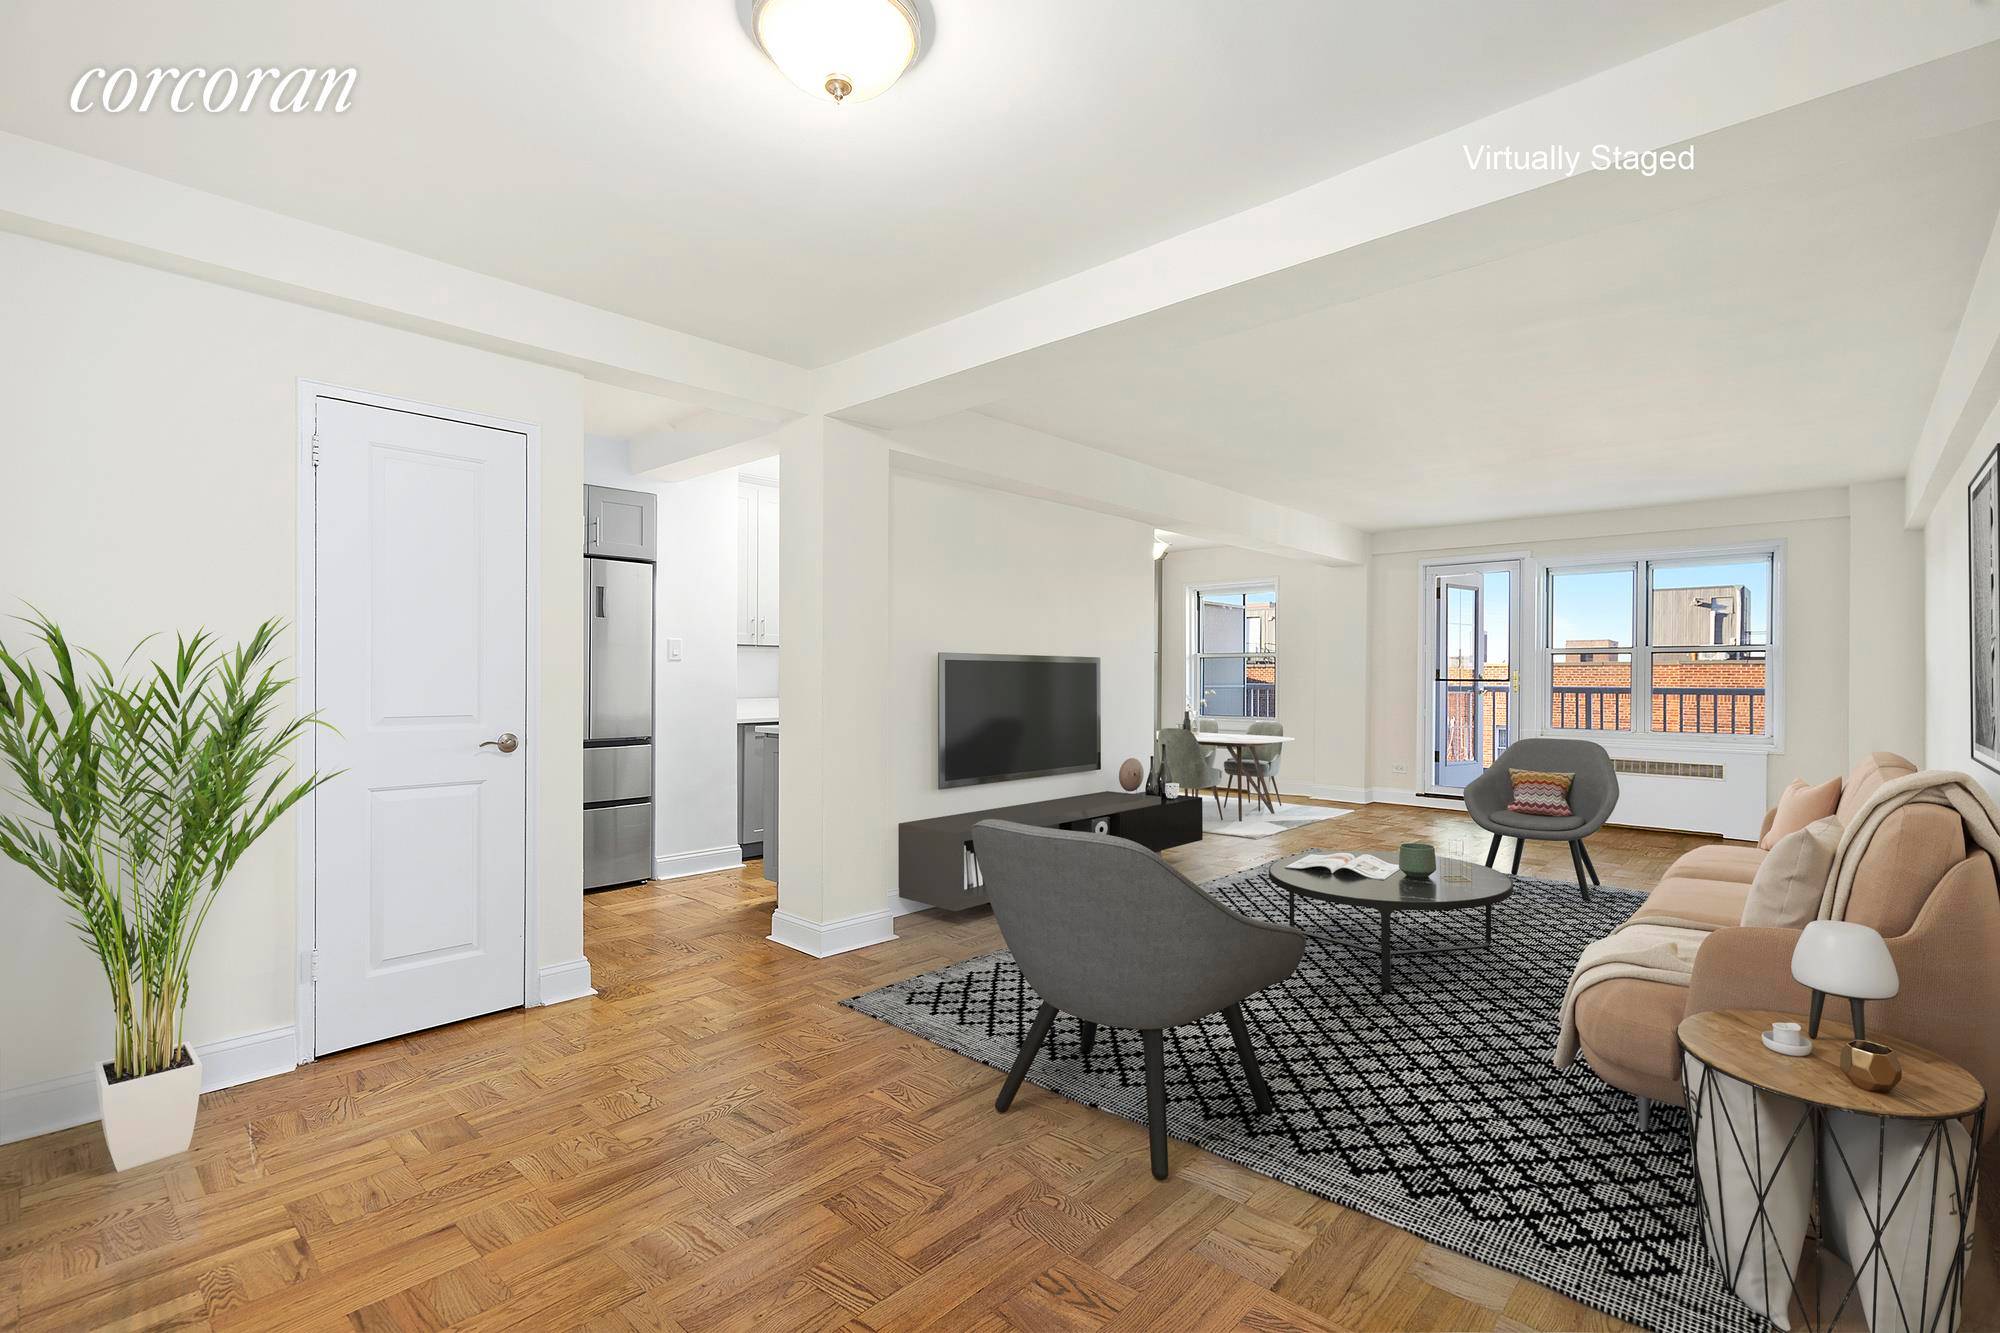 No detail has been overlooked in this stunning two bedroom, one bath apartment that has been gut renovated to perfection in the prestigious BARCLAY PLAZA, a very desirable, luxury co ...